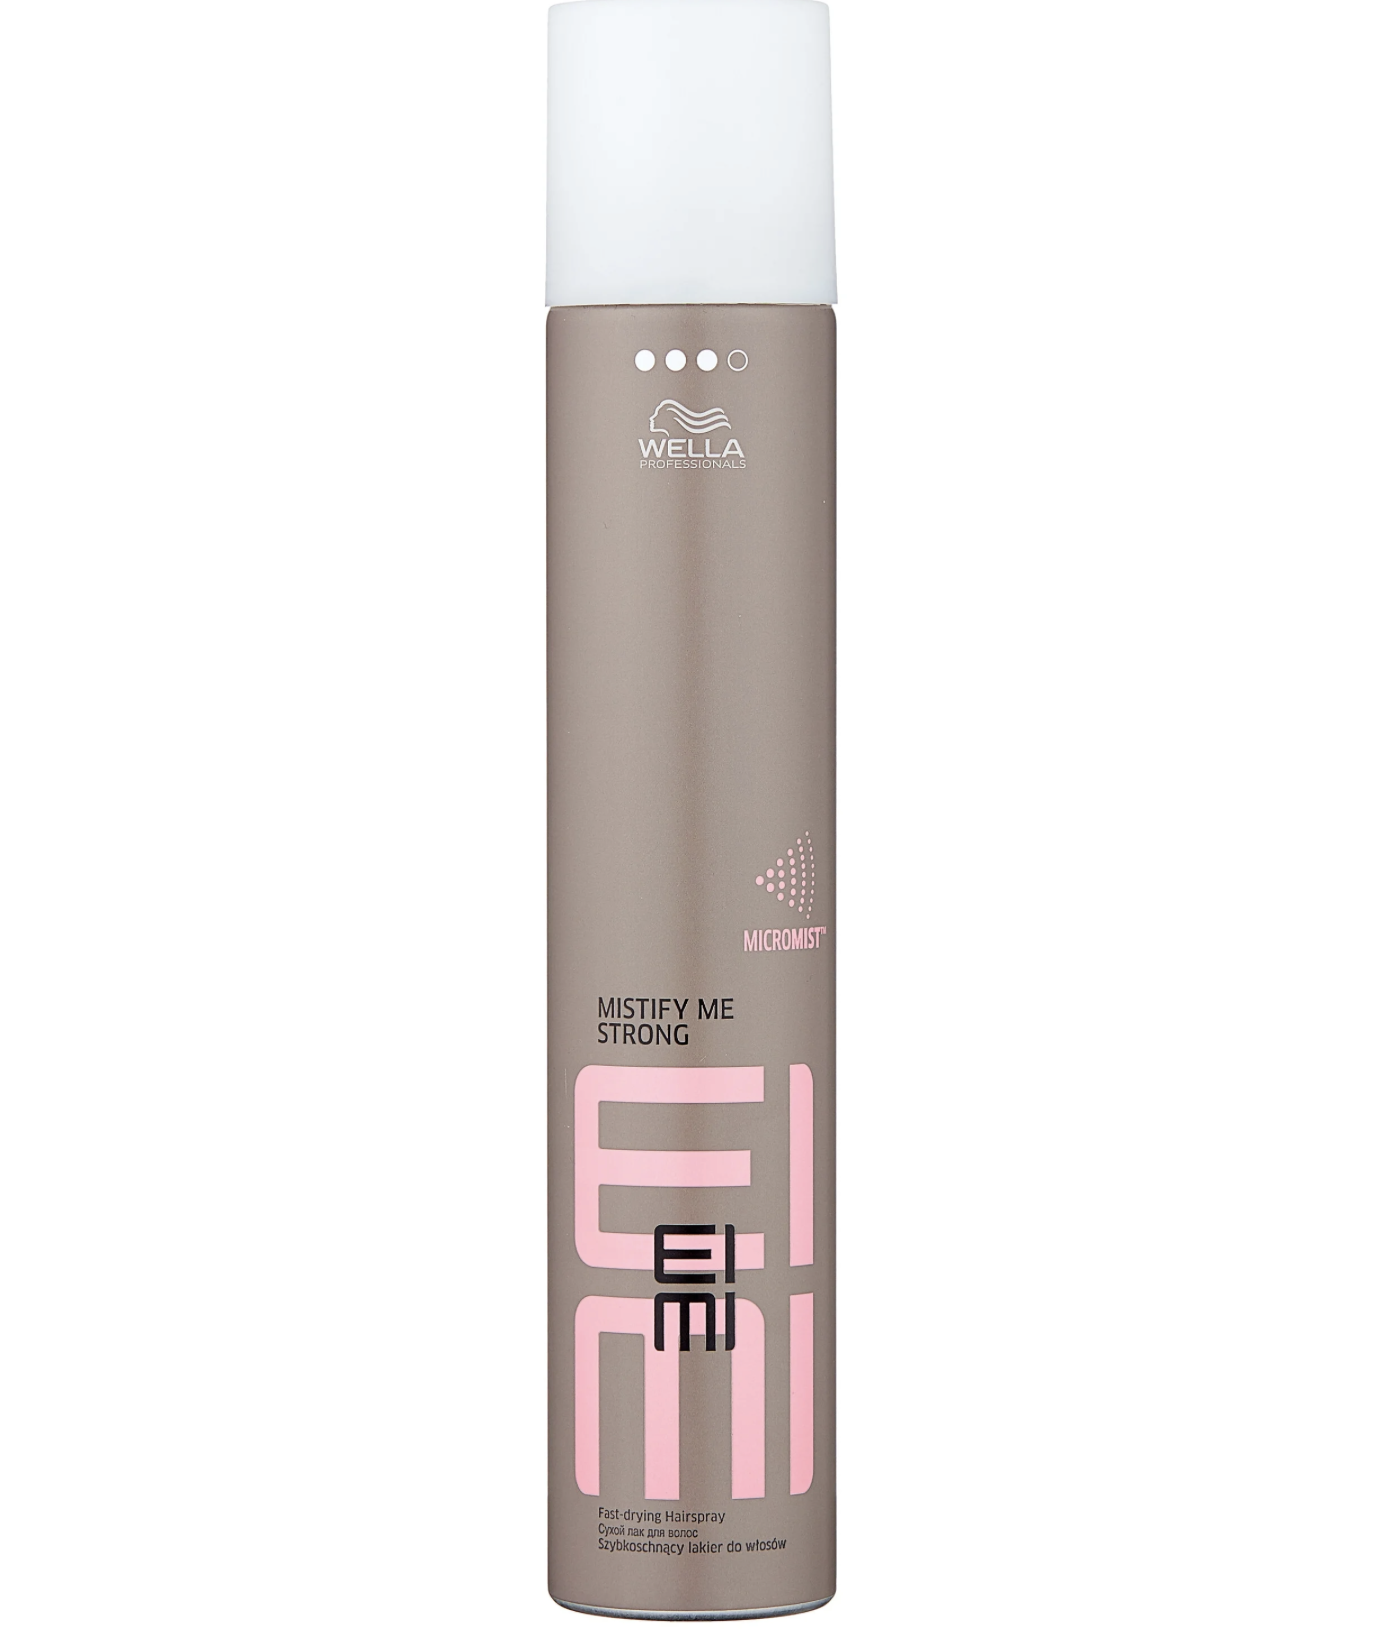   / Wella Professionals -     Eimi Mistify Me Strong   500 